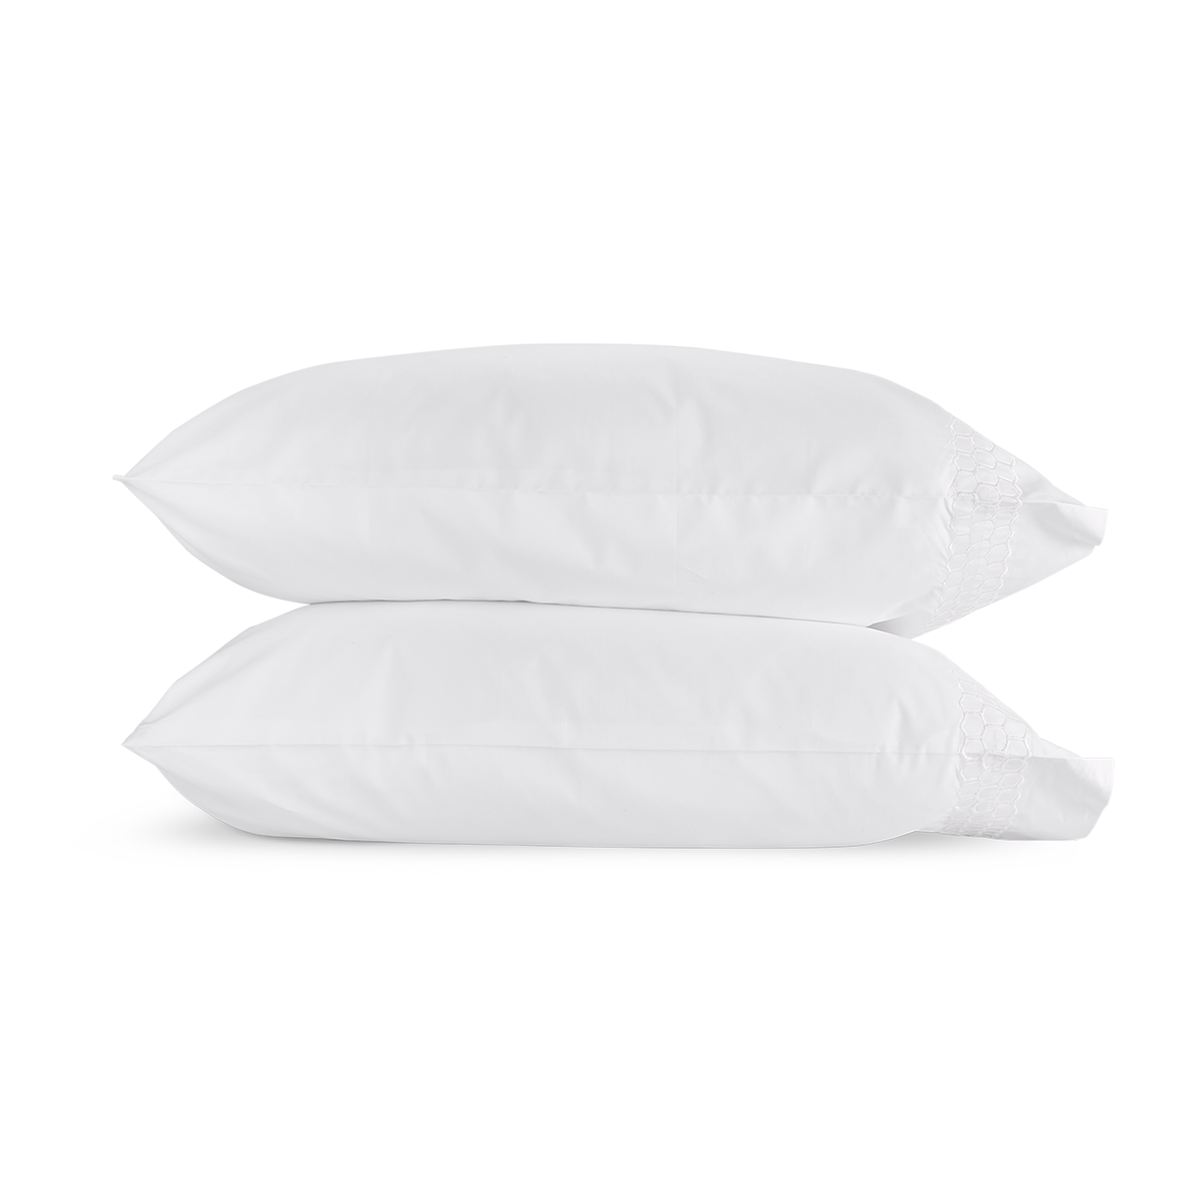 Clear Image of Matouk Liana Bedding Pillowcases in White Color